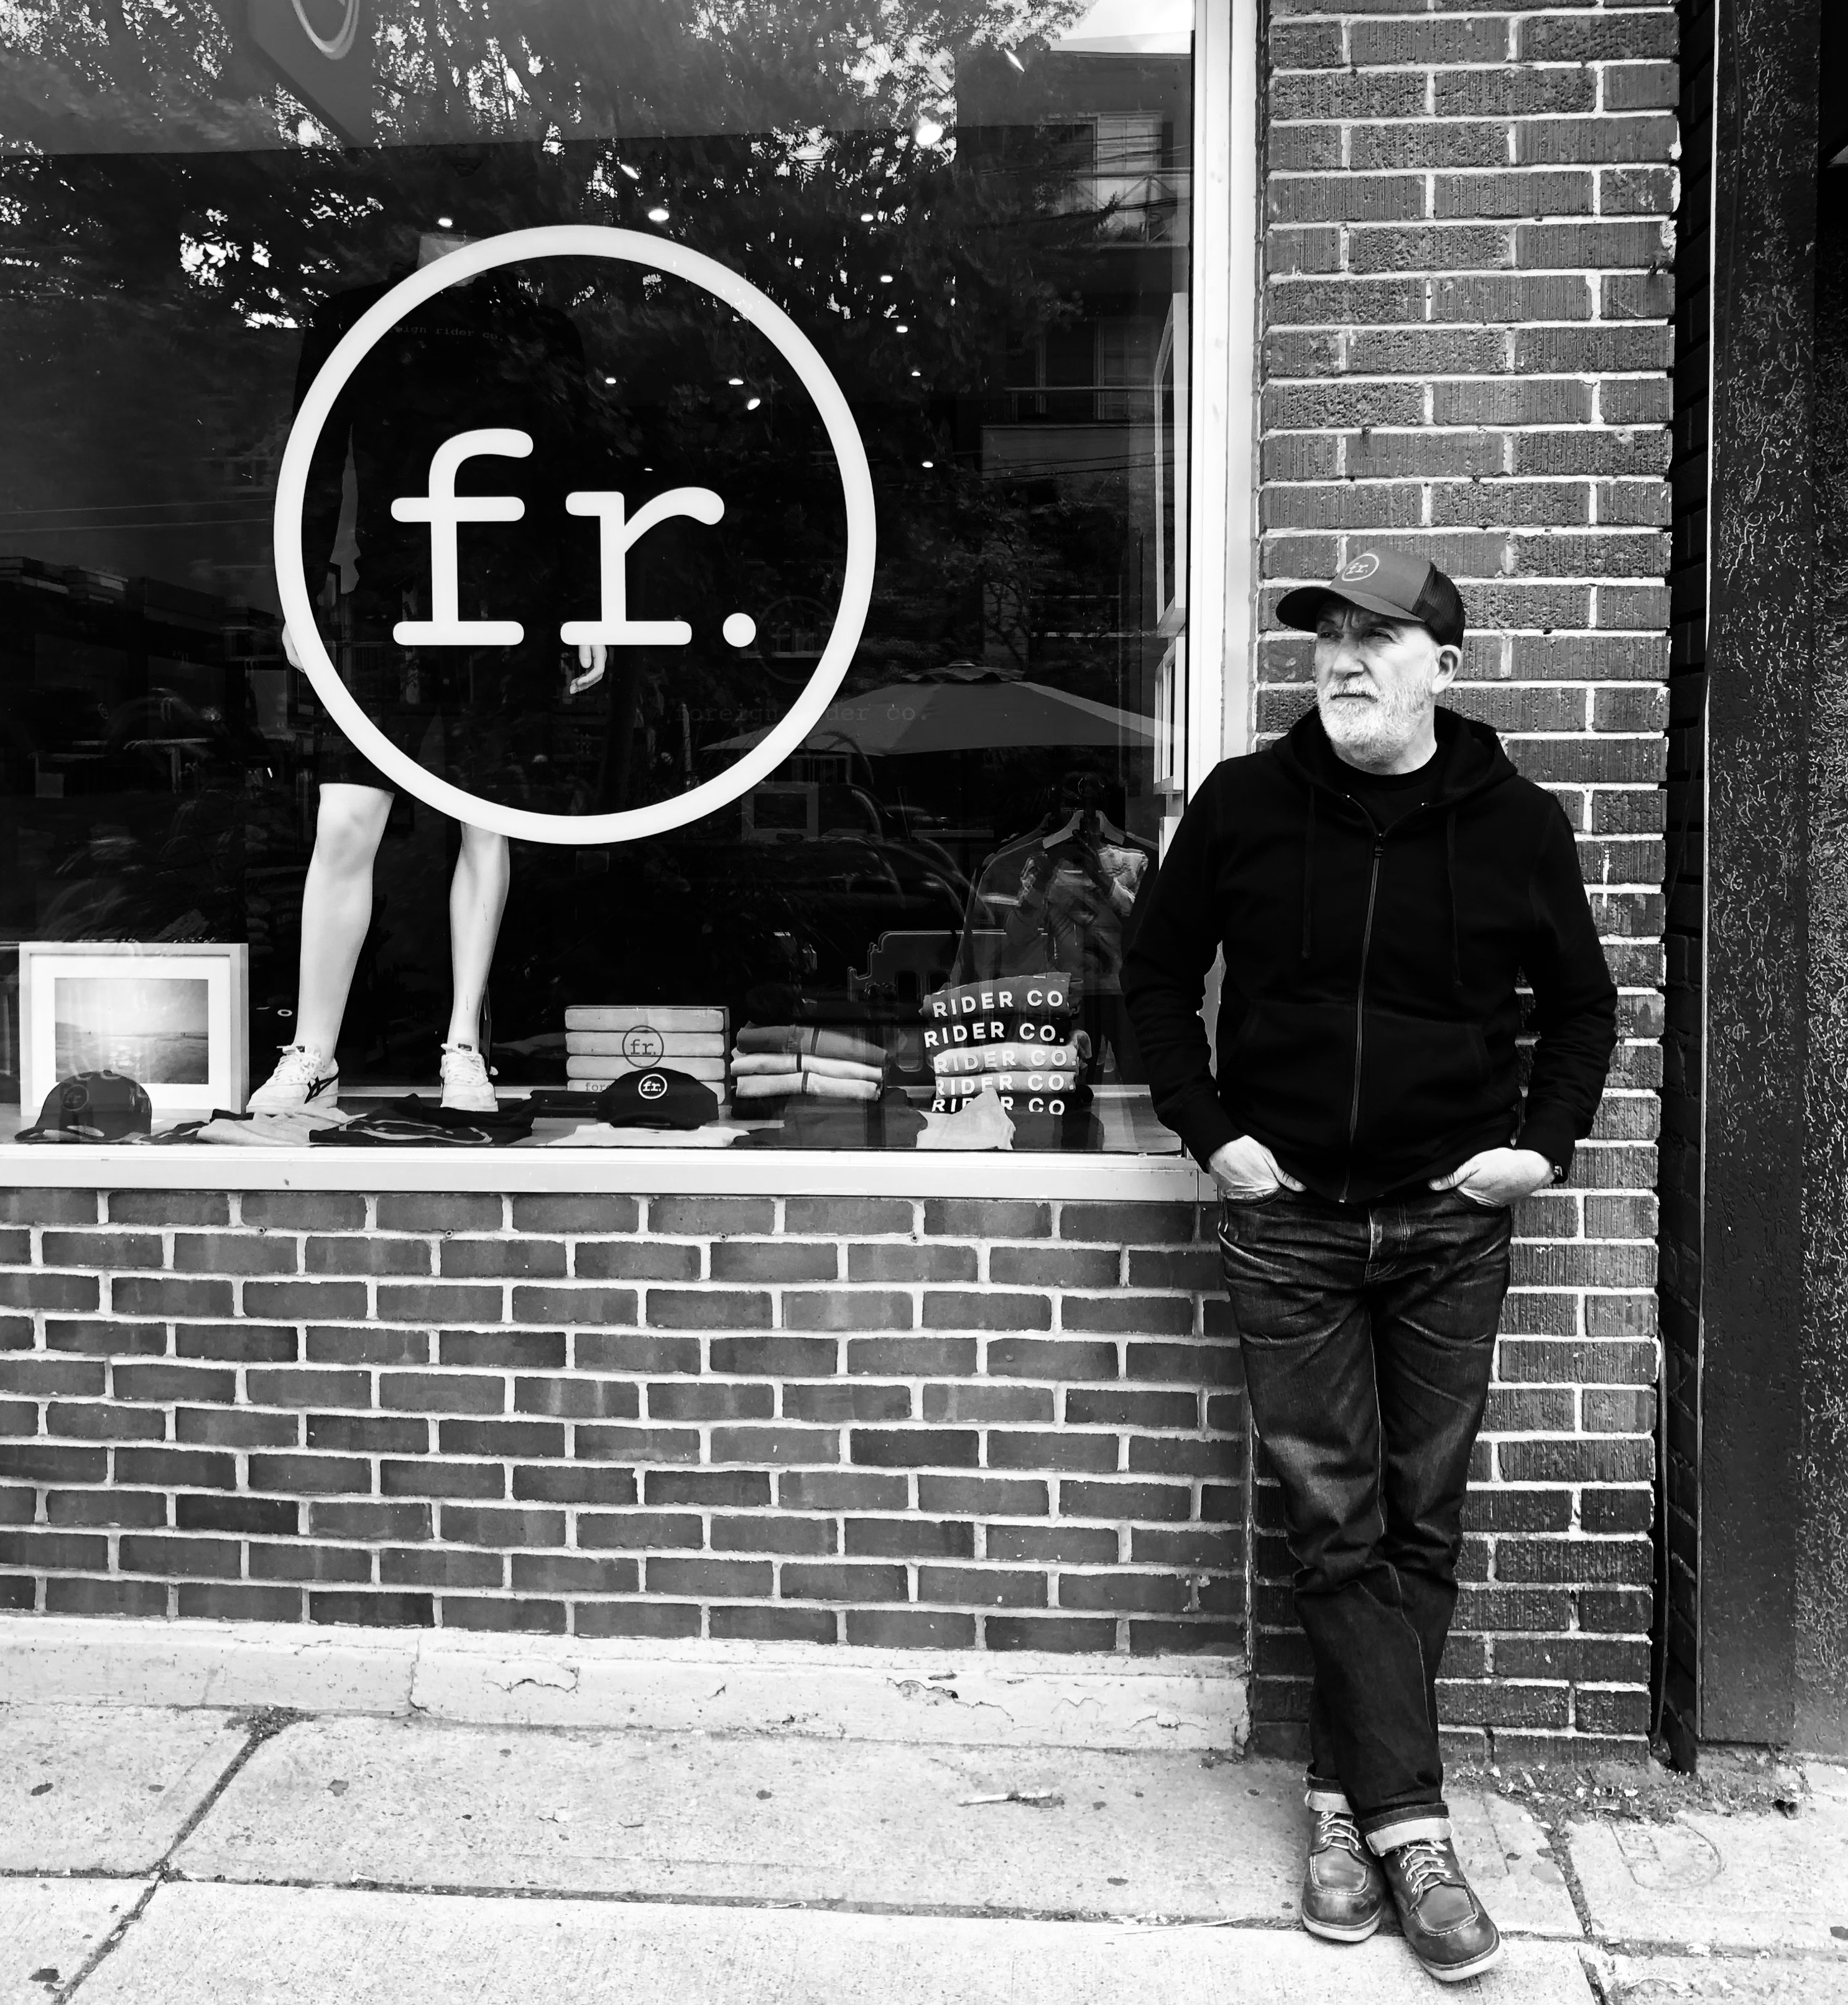 Founder Ralph Dunning leaning on the storefront of Foreign Rider Co. Toronto location